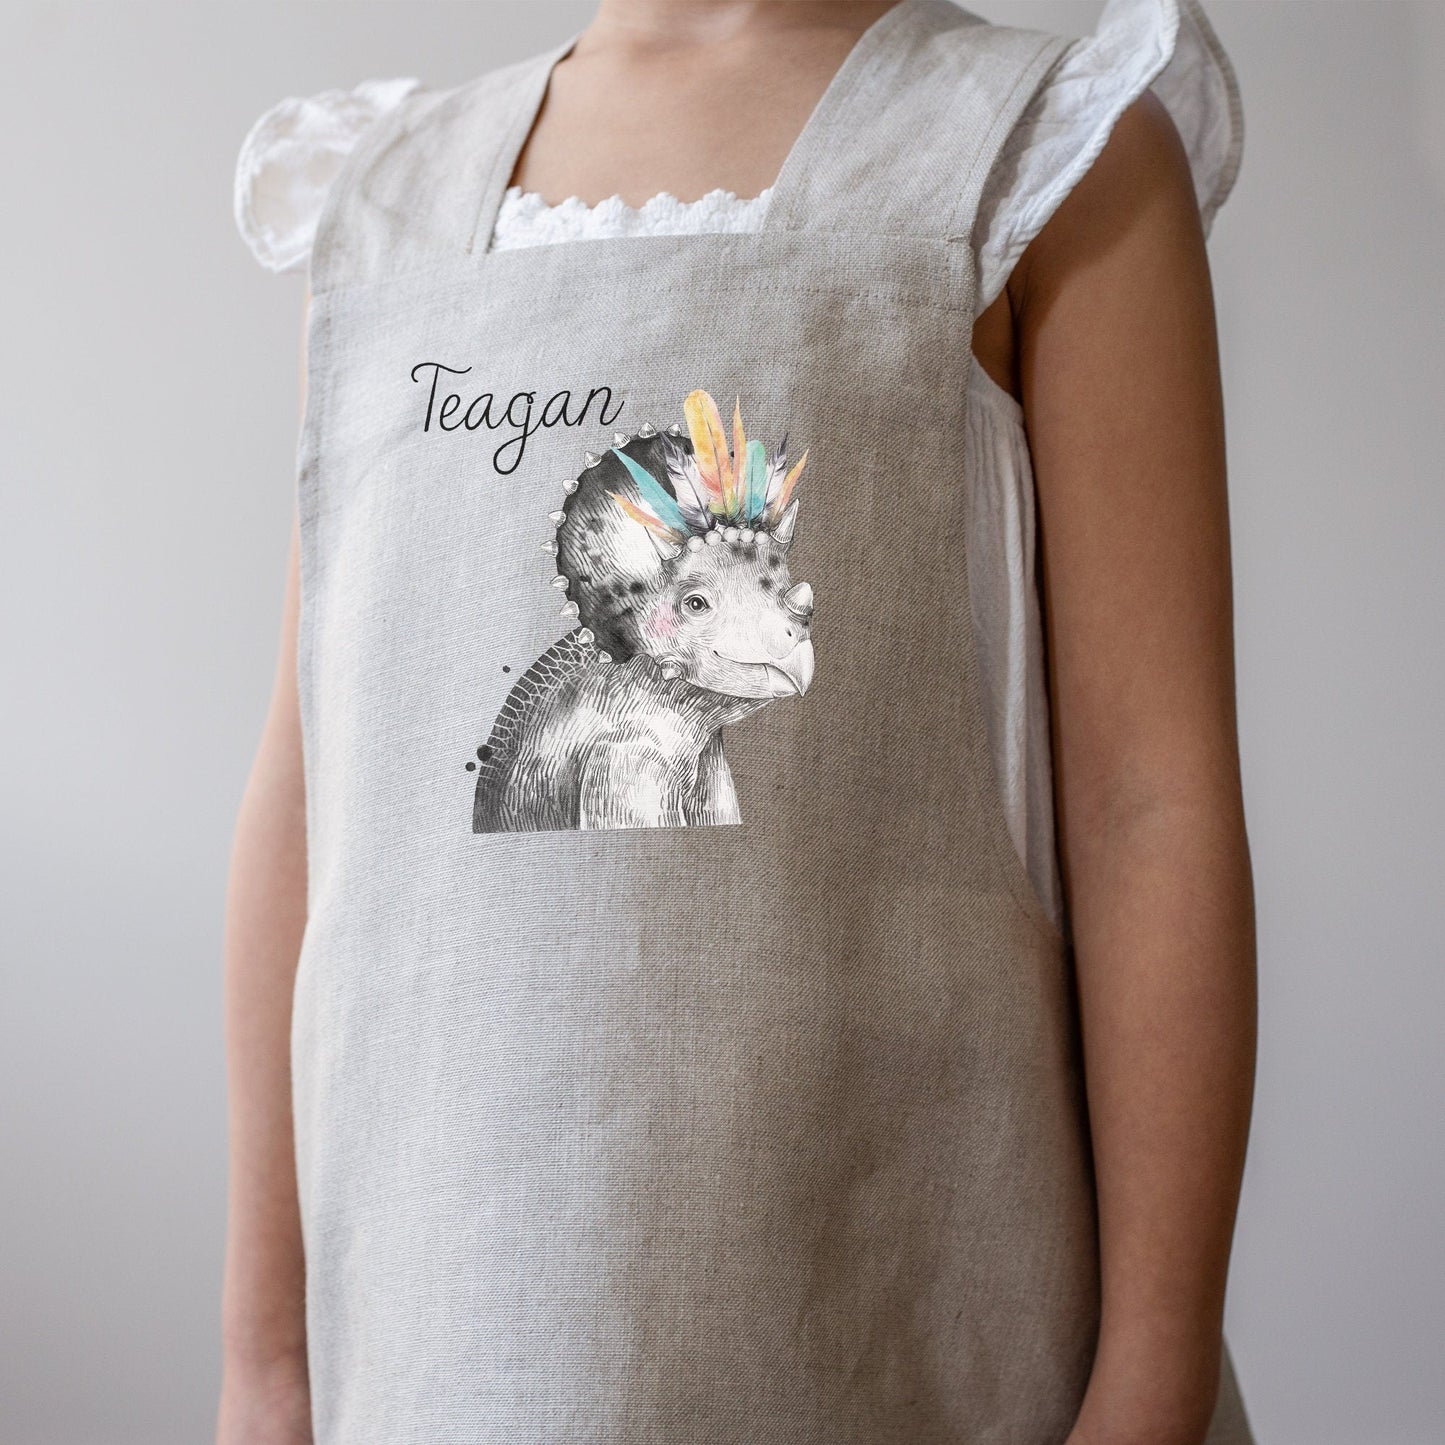 Load image into Gallery viewer, Girls Watercolor Dinosaur Kids Apron |  Kids Dinosaur Apron | Child Apron | Linen Apron | Kid Craft Apron | Personalized Name Apron for Kids
